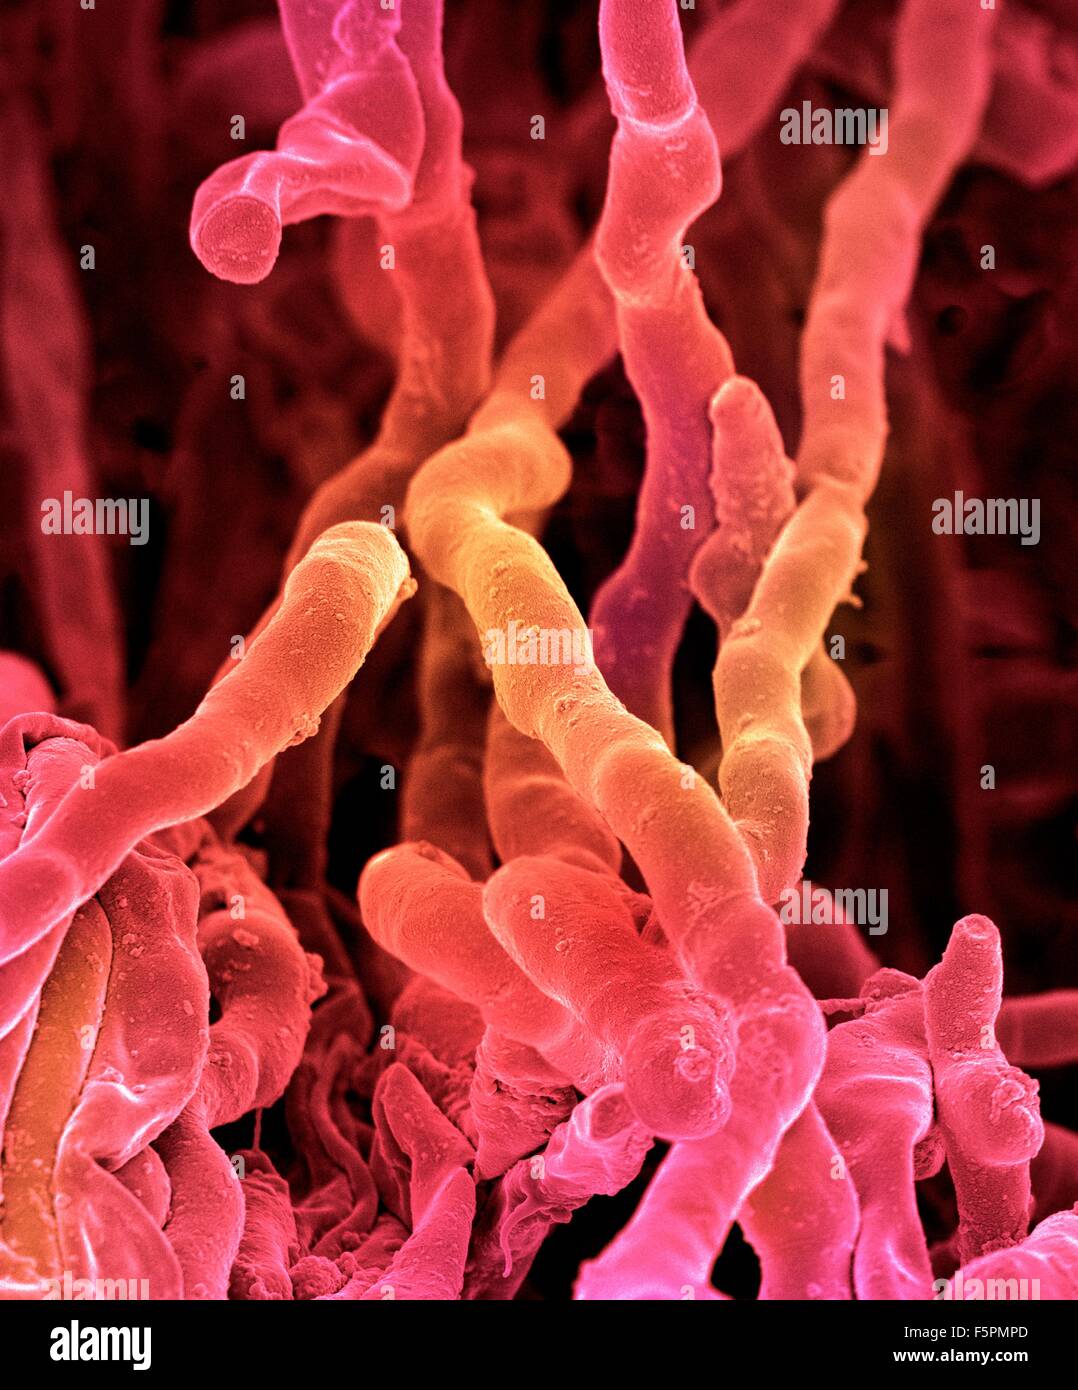 Streptomyces coelicoflavus bacteria. Coloured scanning electron micrograph (SEM) of strands of Streptomyces coelicoflavus Stock Photo